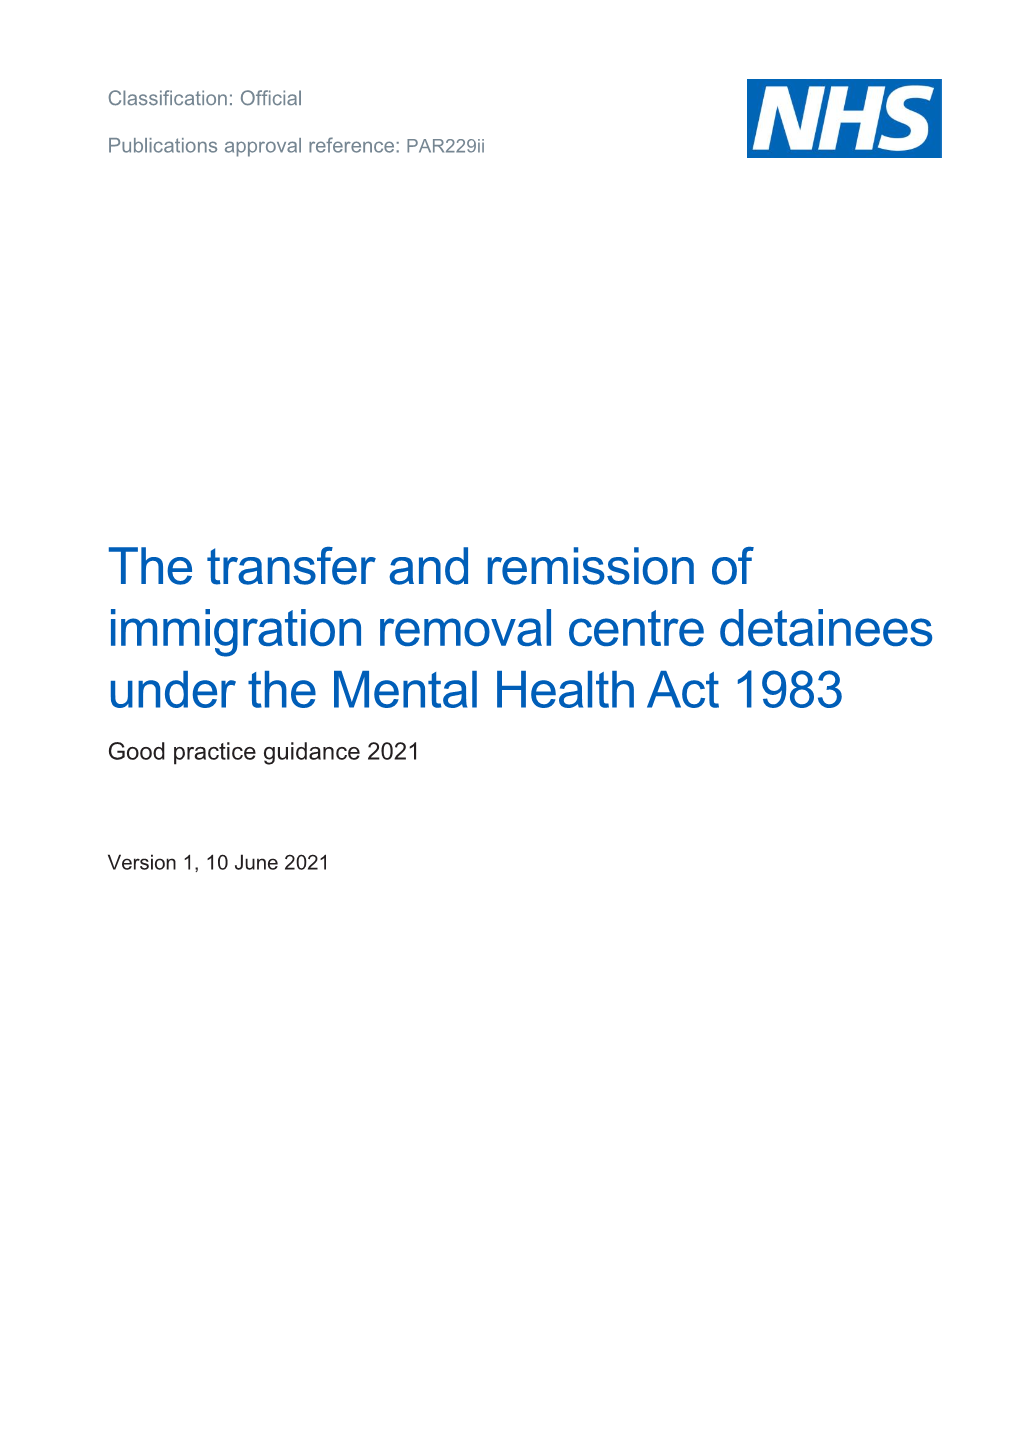 The Transfer and Remission of Immigration Removal Centre Detainees Under the Mental Health Act 1983 Good Practice Guidance 2021